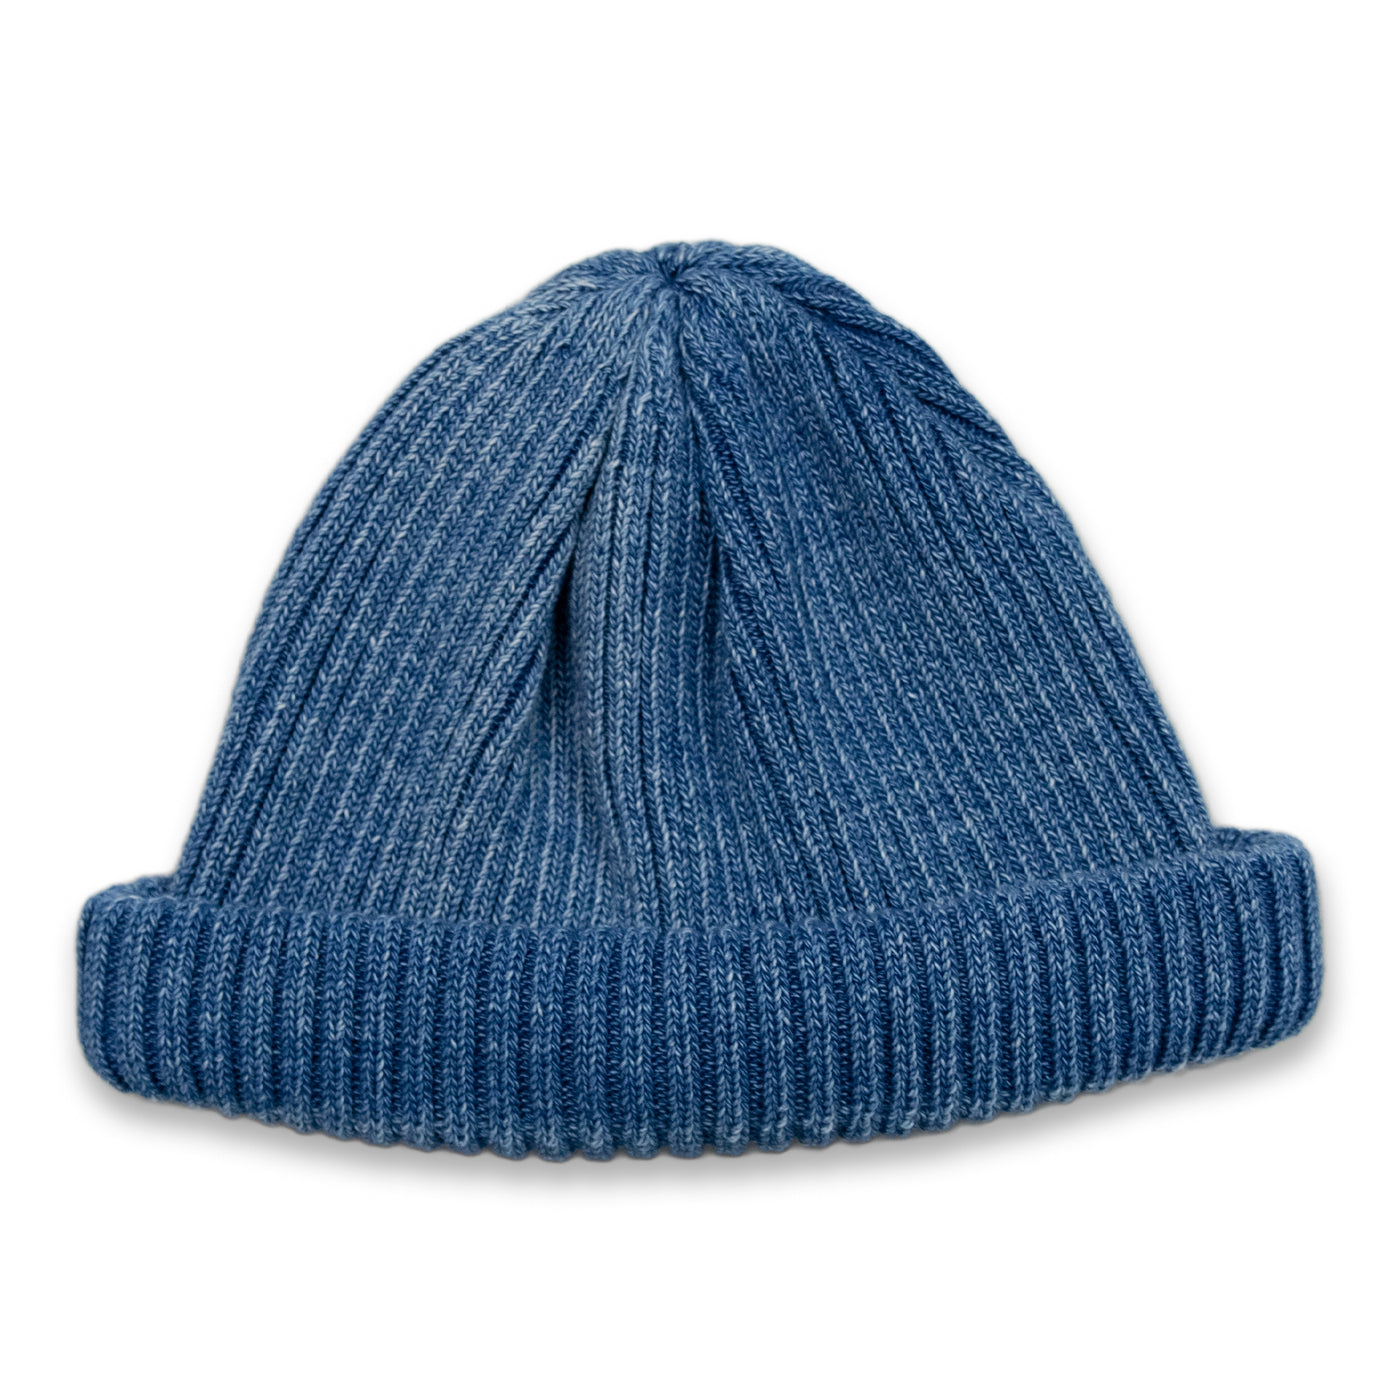  Rototo Cotton Roll Up Beanie Dyed Light Denim FRONT 